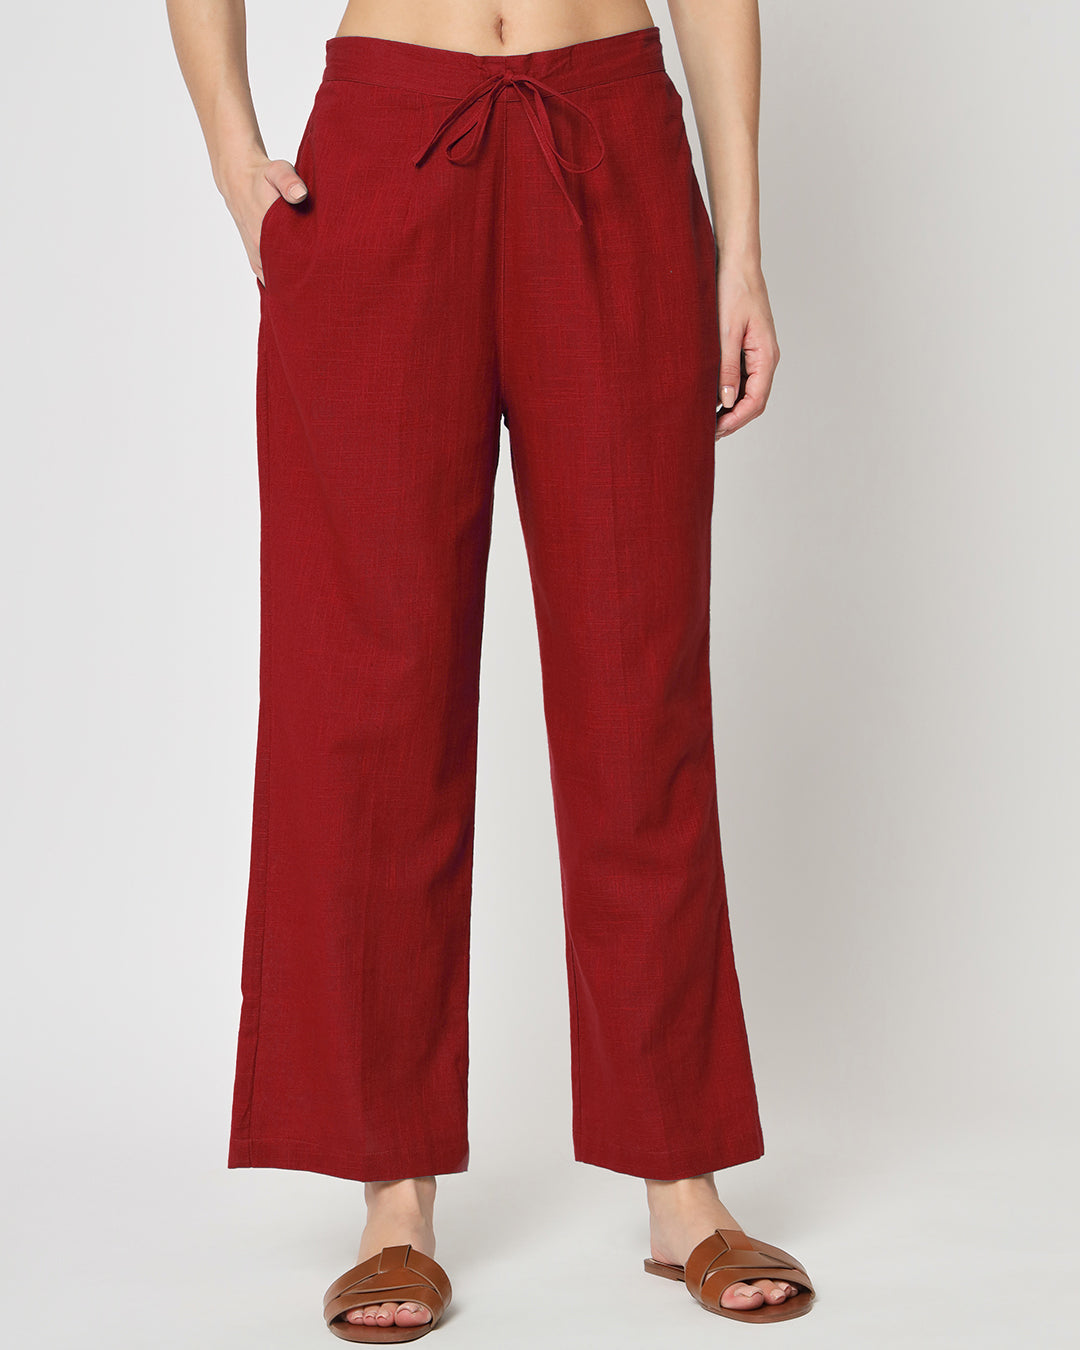 Classic Red Straight Pants